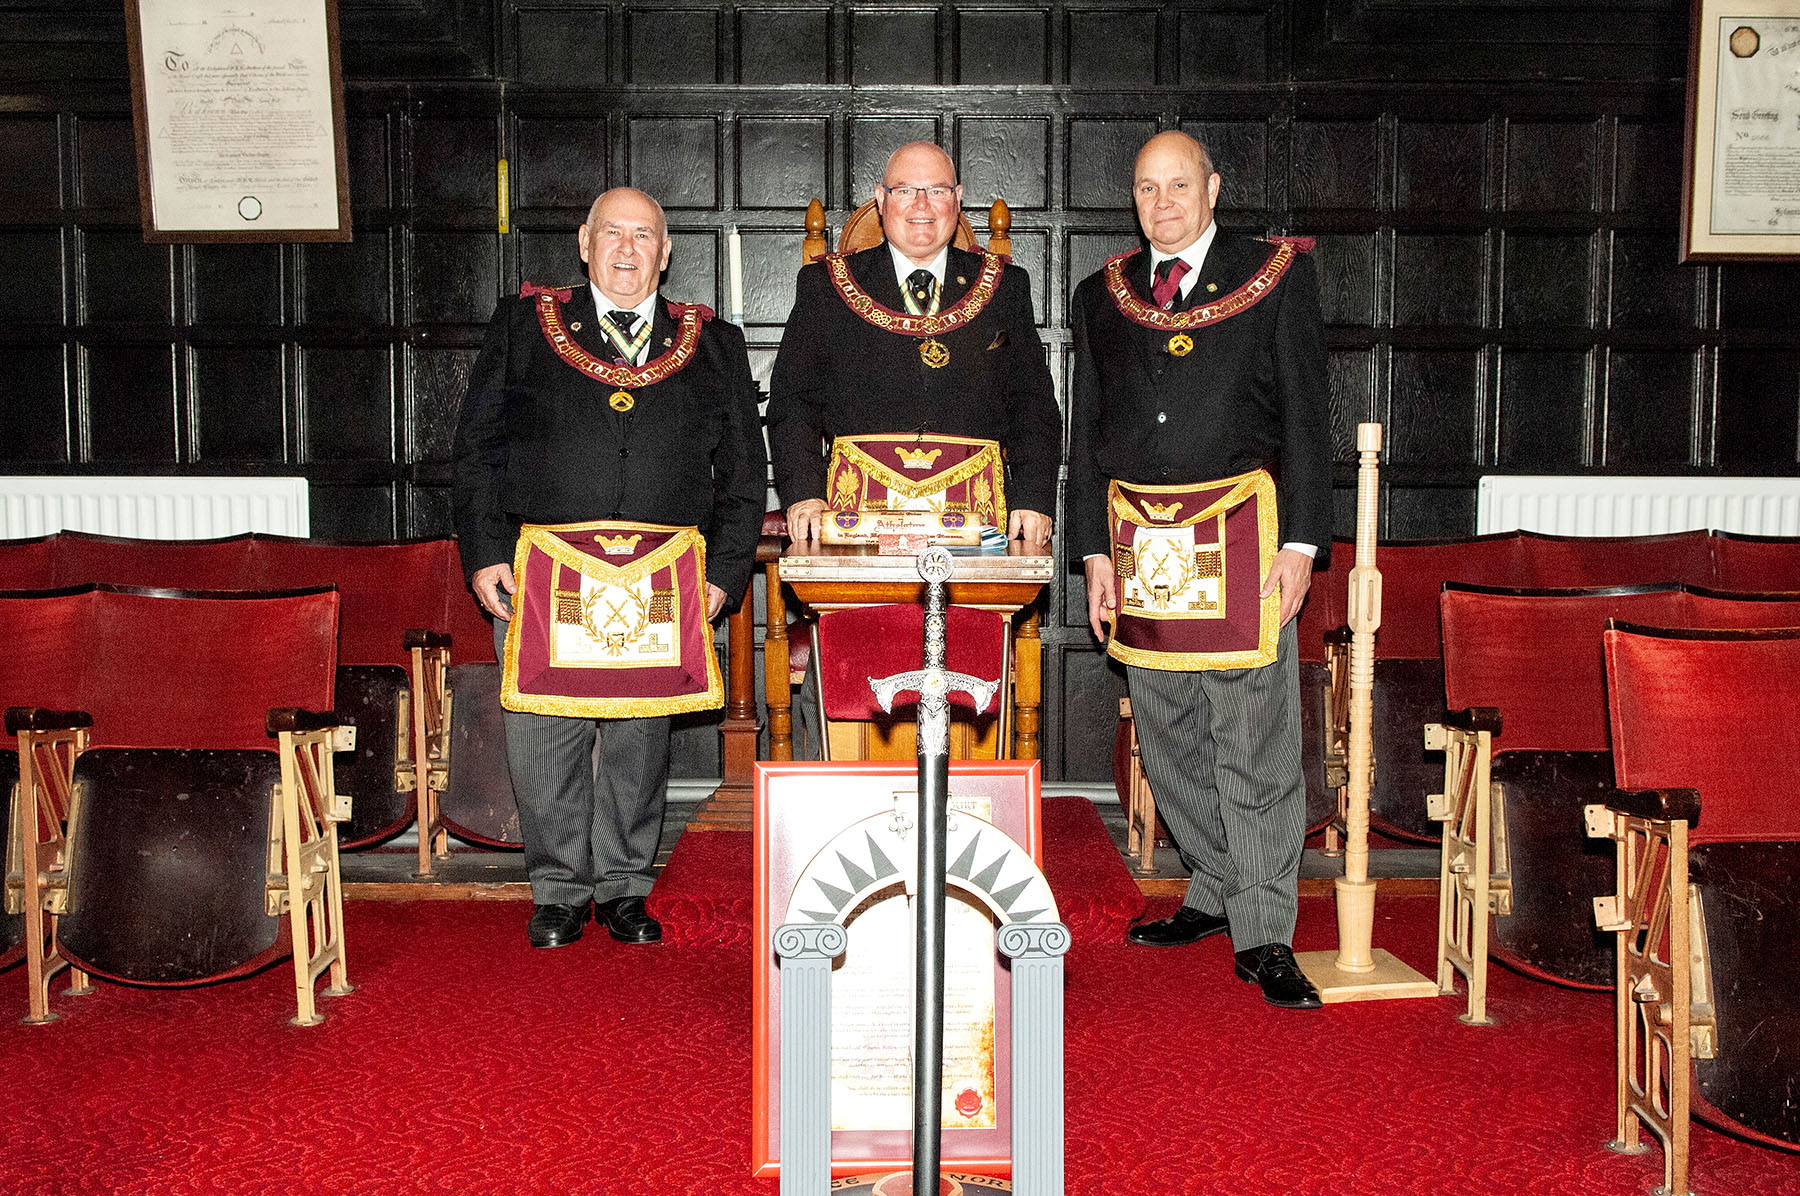 The Annual Meeting of the Province of Northumbria